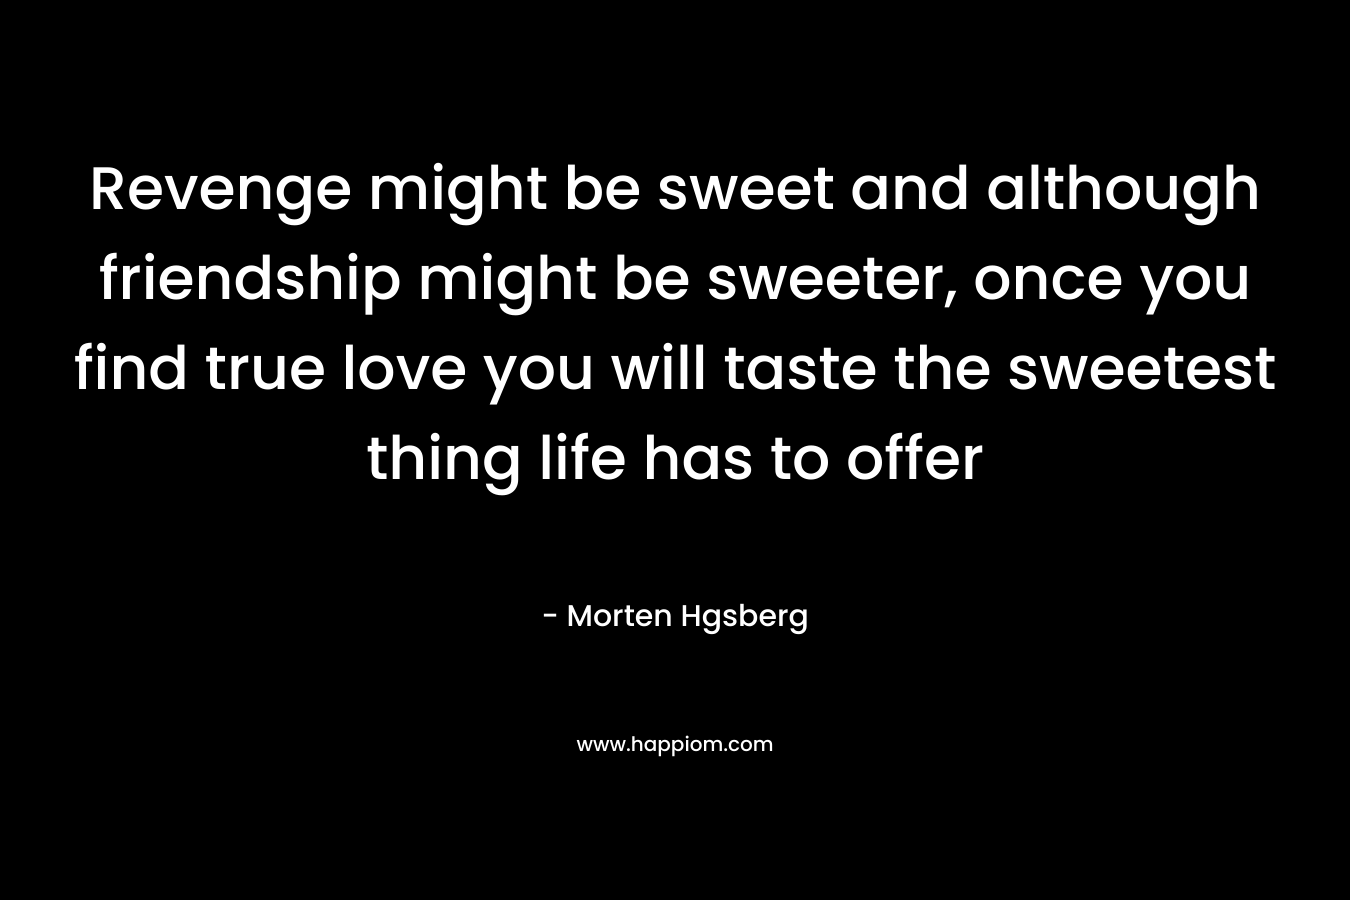 Revenge might be sweet and although friendship might be sweeter, once you find true love you will taste the sweetest thing life has to offer – Morten Hgsberg